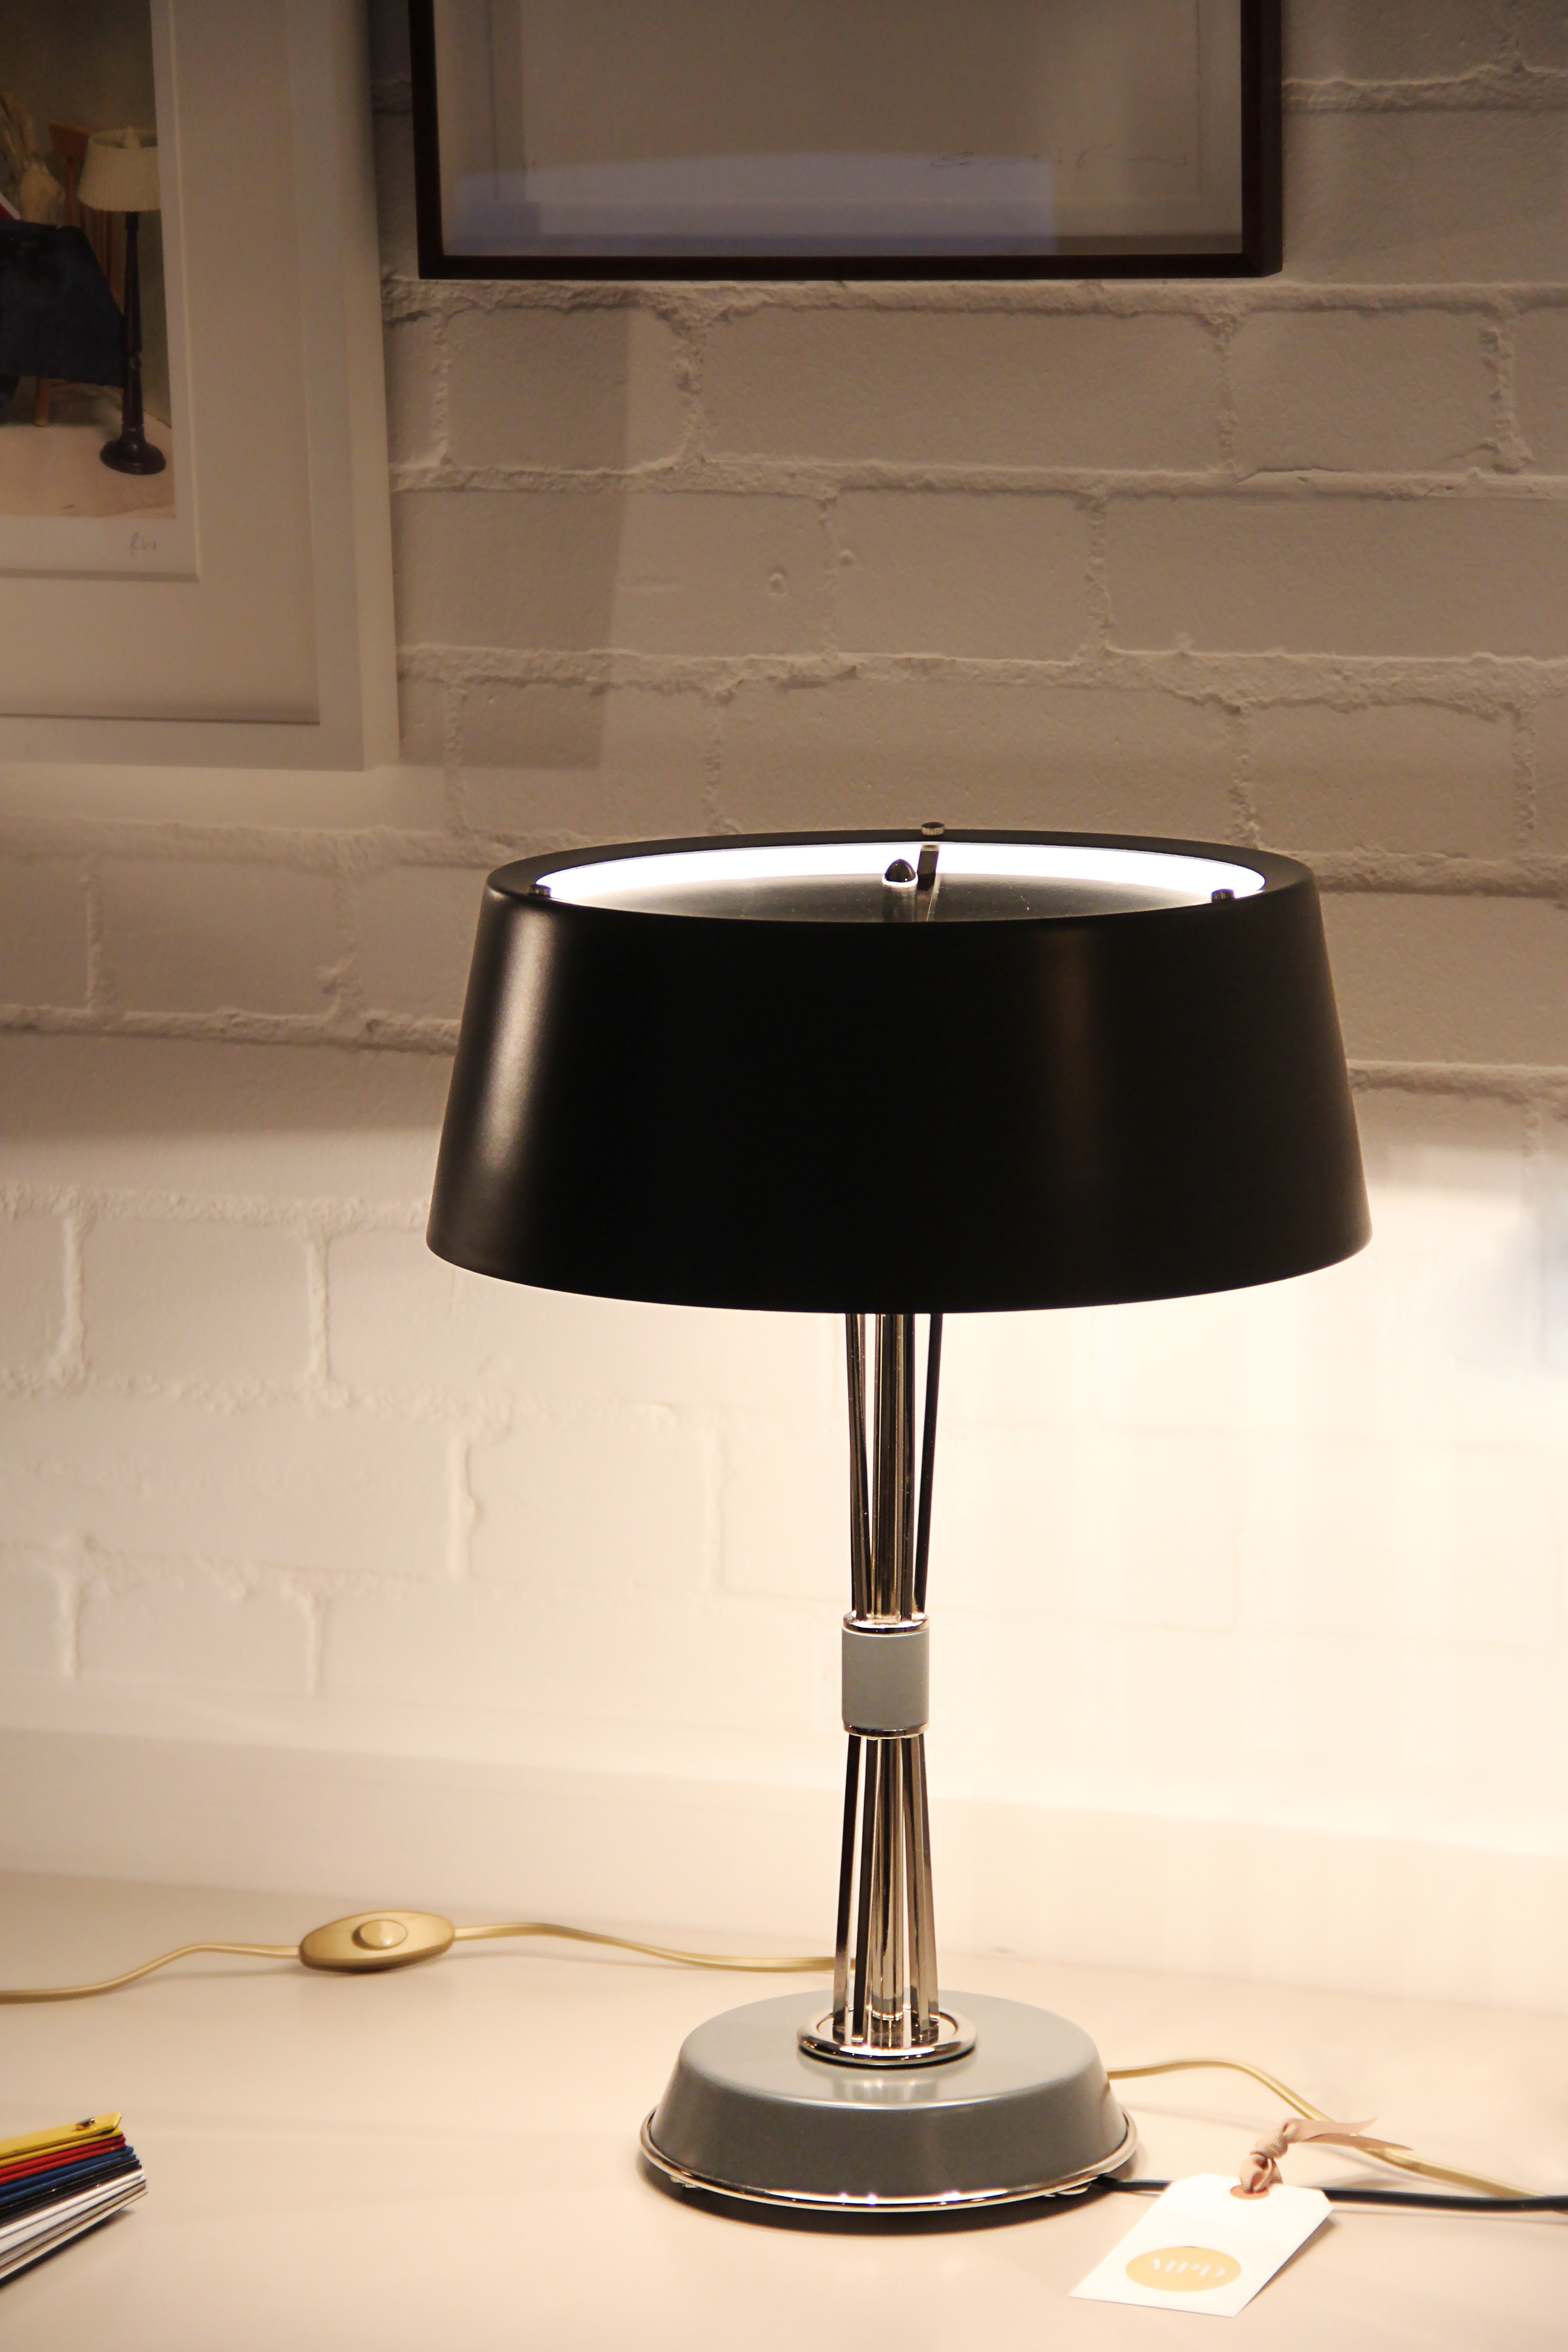 Light Up Your Study With These Back to School Table Lamps